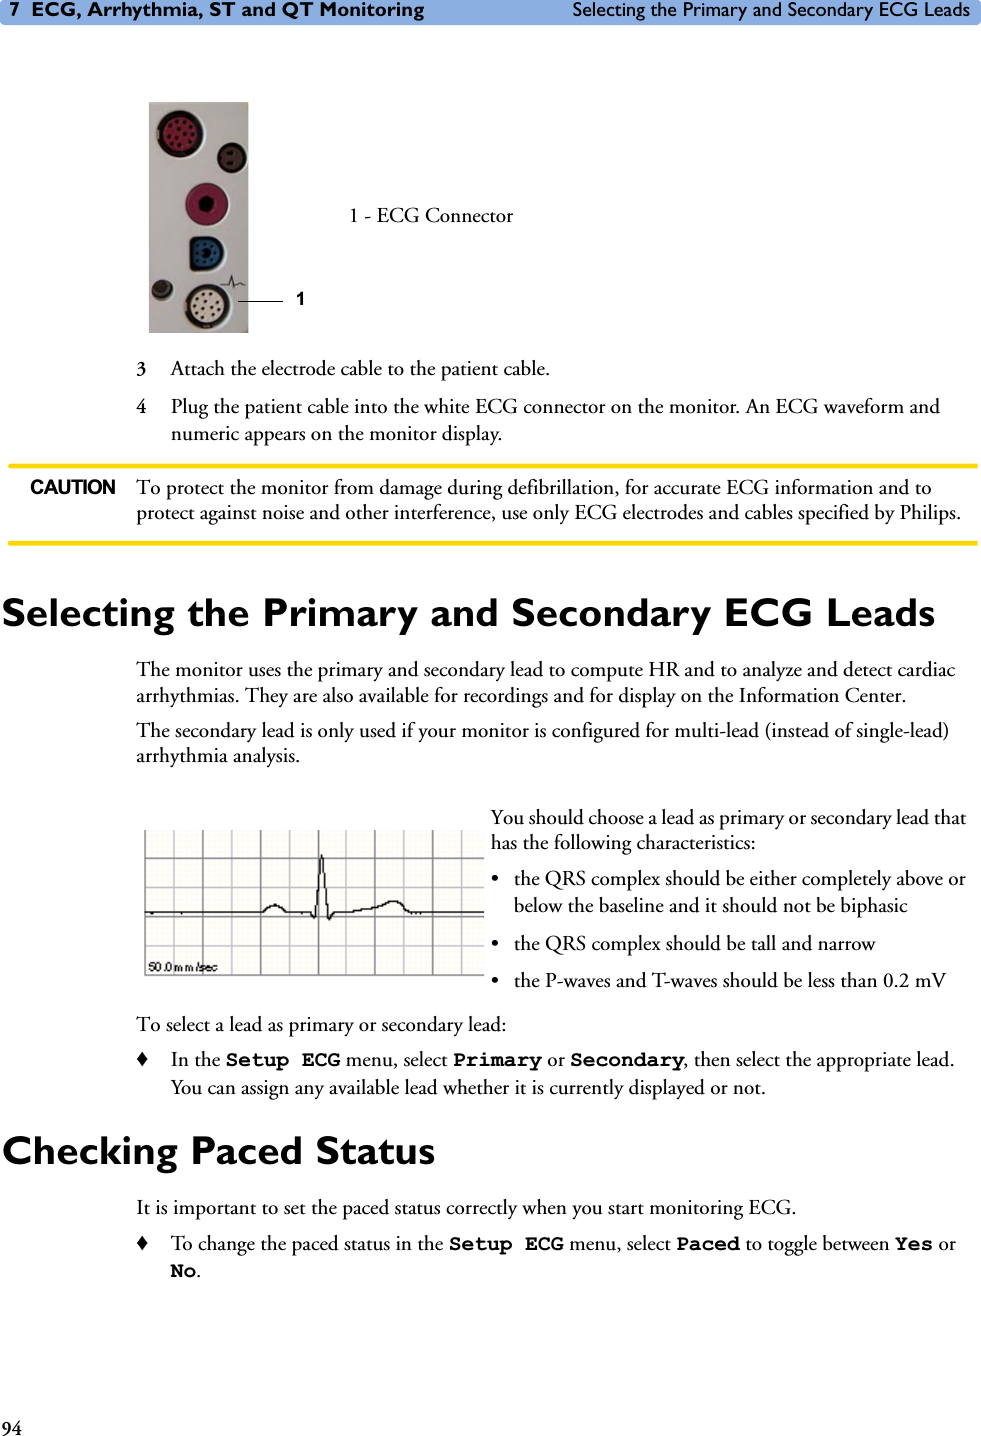 7 ECG, Arrhythmia, ST and QT Monitoring Selecting the Primary and Secondary ECG Leads943Attach the electrode cable to the patient cable.4Plug the patient cable into the white ECG connector on the monitor. An ECG waveform and numeric appears on the monitor display. CAUTION To protect the monitor from damage during defibrillation, for accurate ECG information and to protect against noise and other interference, use only ECG electrodes and cables specified by Philips. Selecting the Primary and Secondary ECG LeadsThe monitor uses the primary and secondary lead to compute HR and to analyze and detect cardiac arrhythmias. They are also available for recordings and for display on the Information Center.The secondary lead is only used if your monitor is configured for multi-lead (instead of single-lead) arrhythmia analysis. To select a lead as primary or secondary lead:♦In the Setup ECG menu, select Primary or Secondary, then select the appropriate lead. You can assign any available lead whether it is currently displayed or not.Checking Paced StatusIt is important to set the paced status correctly when you start monitoring ECG. ♦To change the paced status in the Setup ECG menu, select Paced to toggle between Yes or No.1 - ECG Connector1You should choose a lead as primary or secondary lead that has the following characteristics: • the QRS complex should be either completely above or below the baseline and it should not be biphasic• the QRS complex should be tall and narrow• the P-waves and T-waves should be less than 0.2 mV